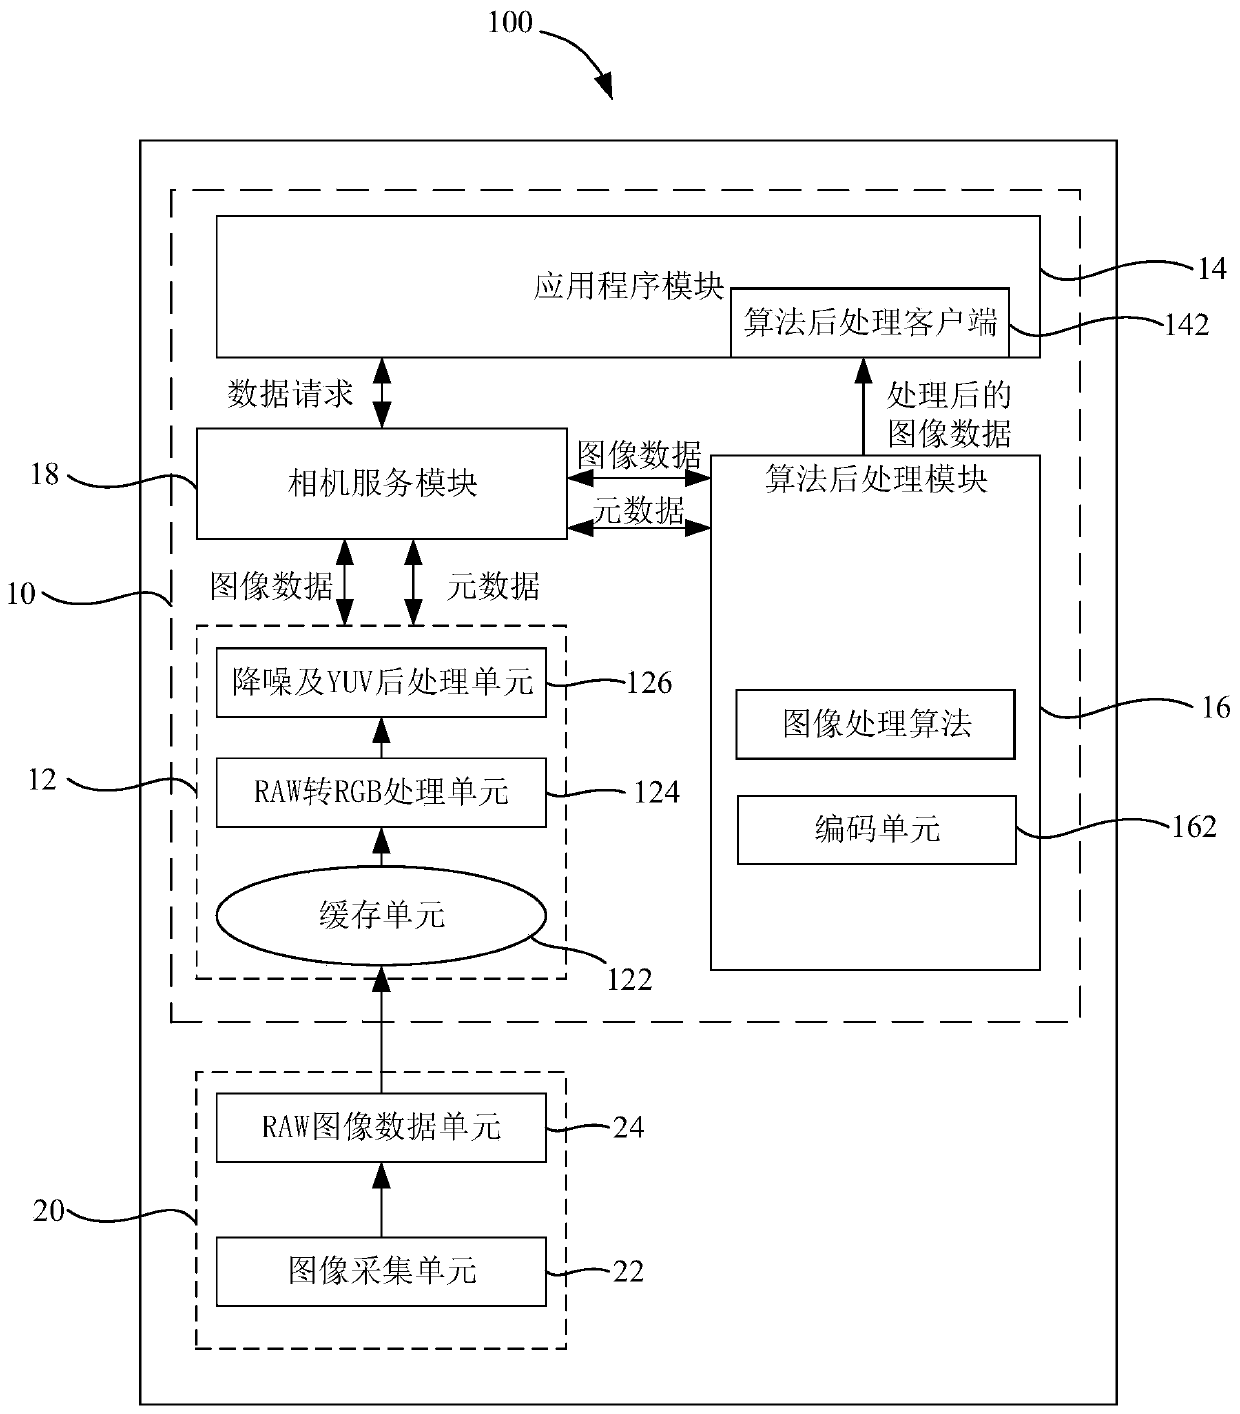 Image processor, image processing method, shooting device and electronic device